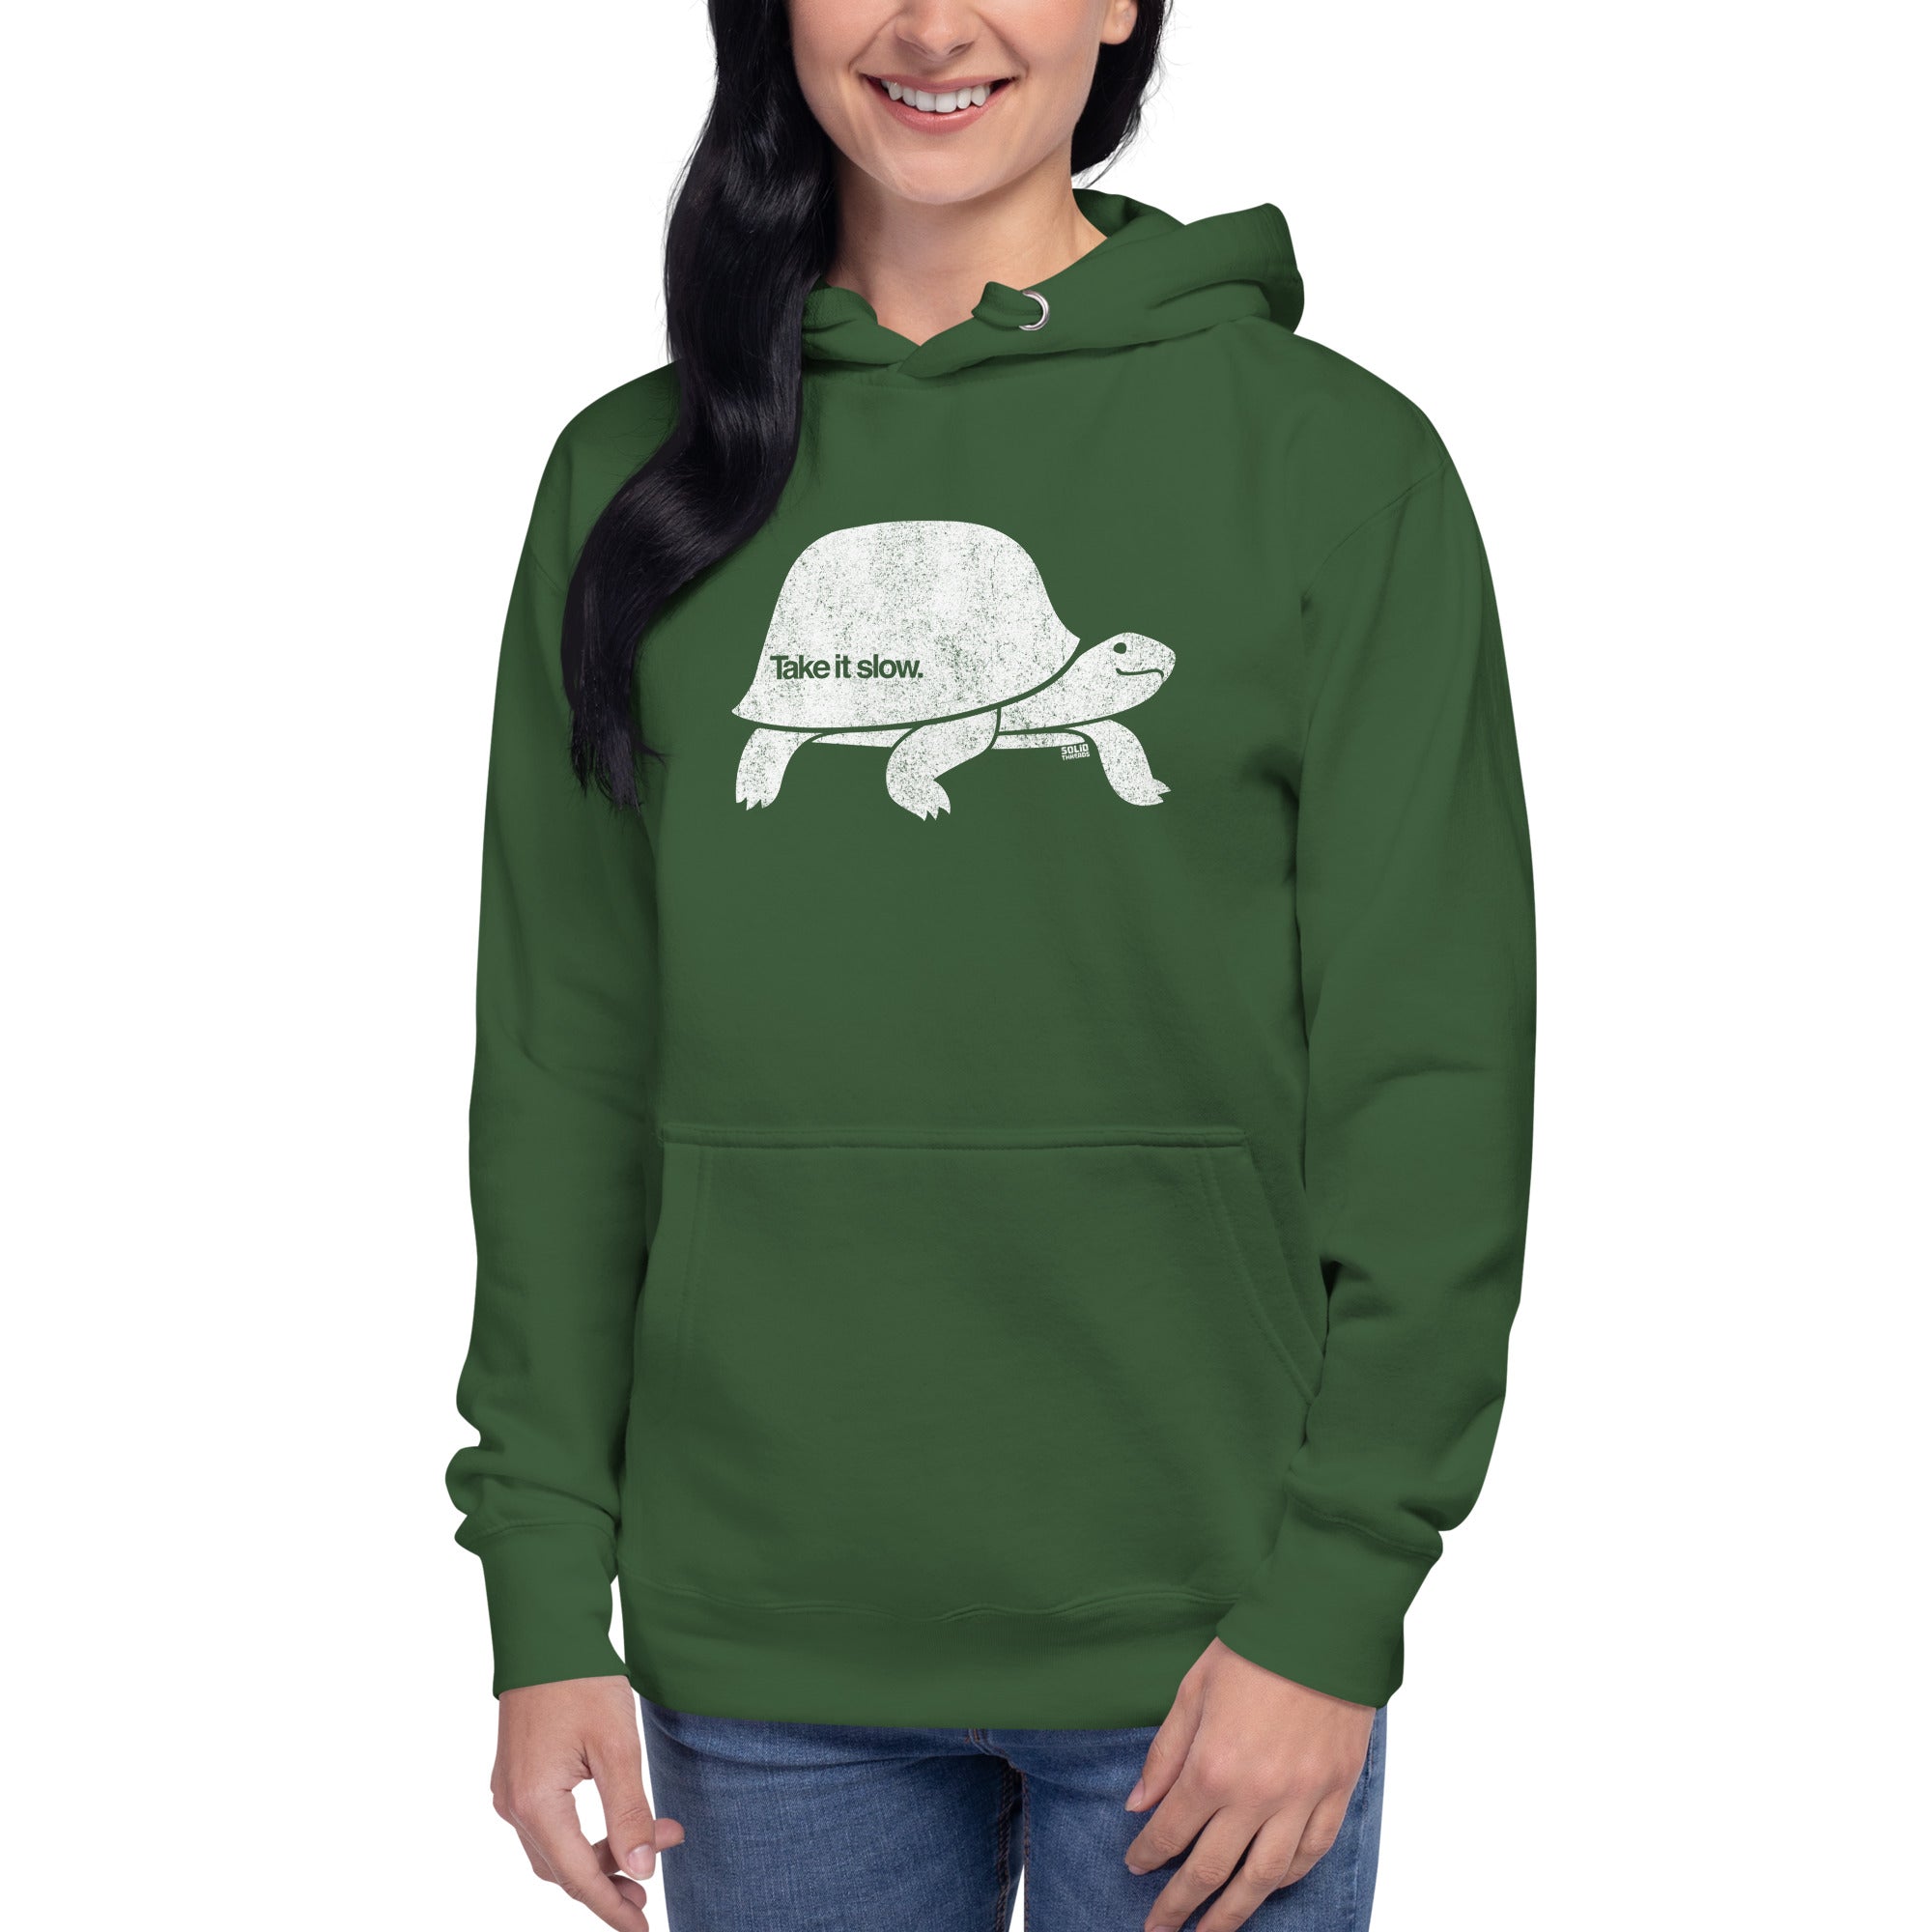 Take It Slow Vintage Classic Pullover Hoodie | Cool Turtle Fleece On Model | Solid Threads